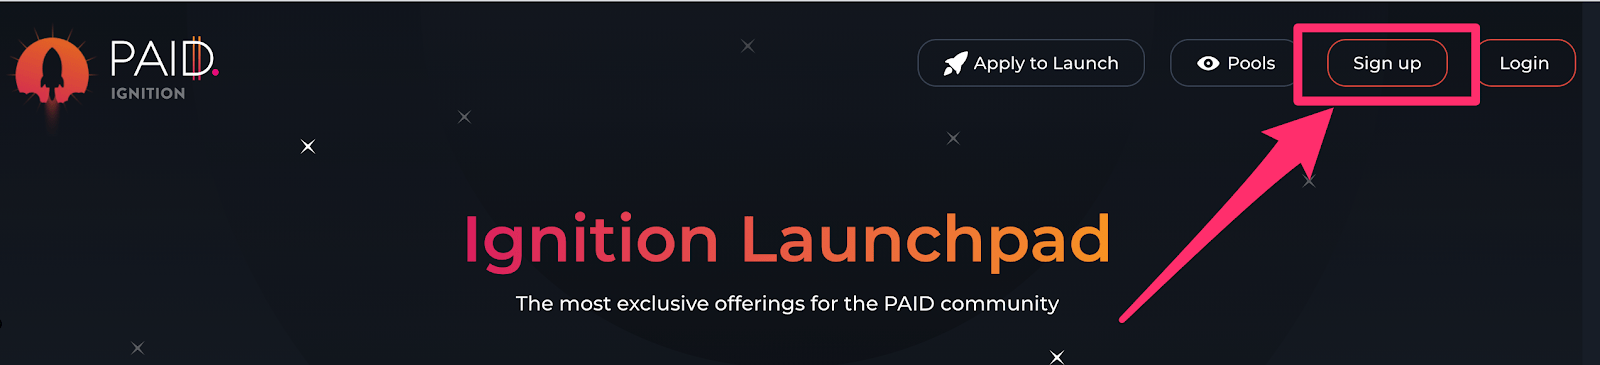 Signup Paid Ignition